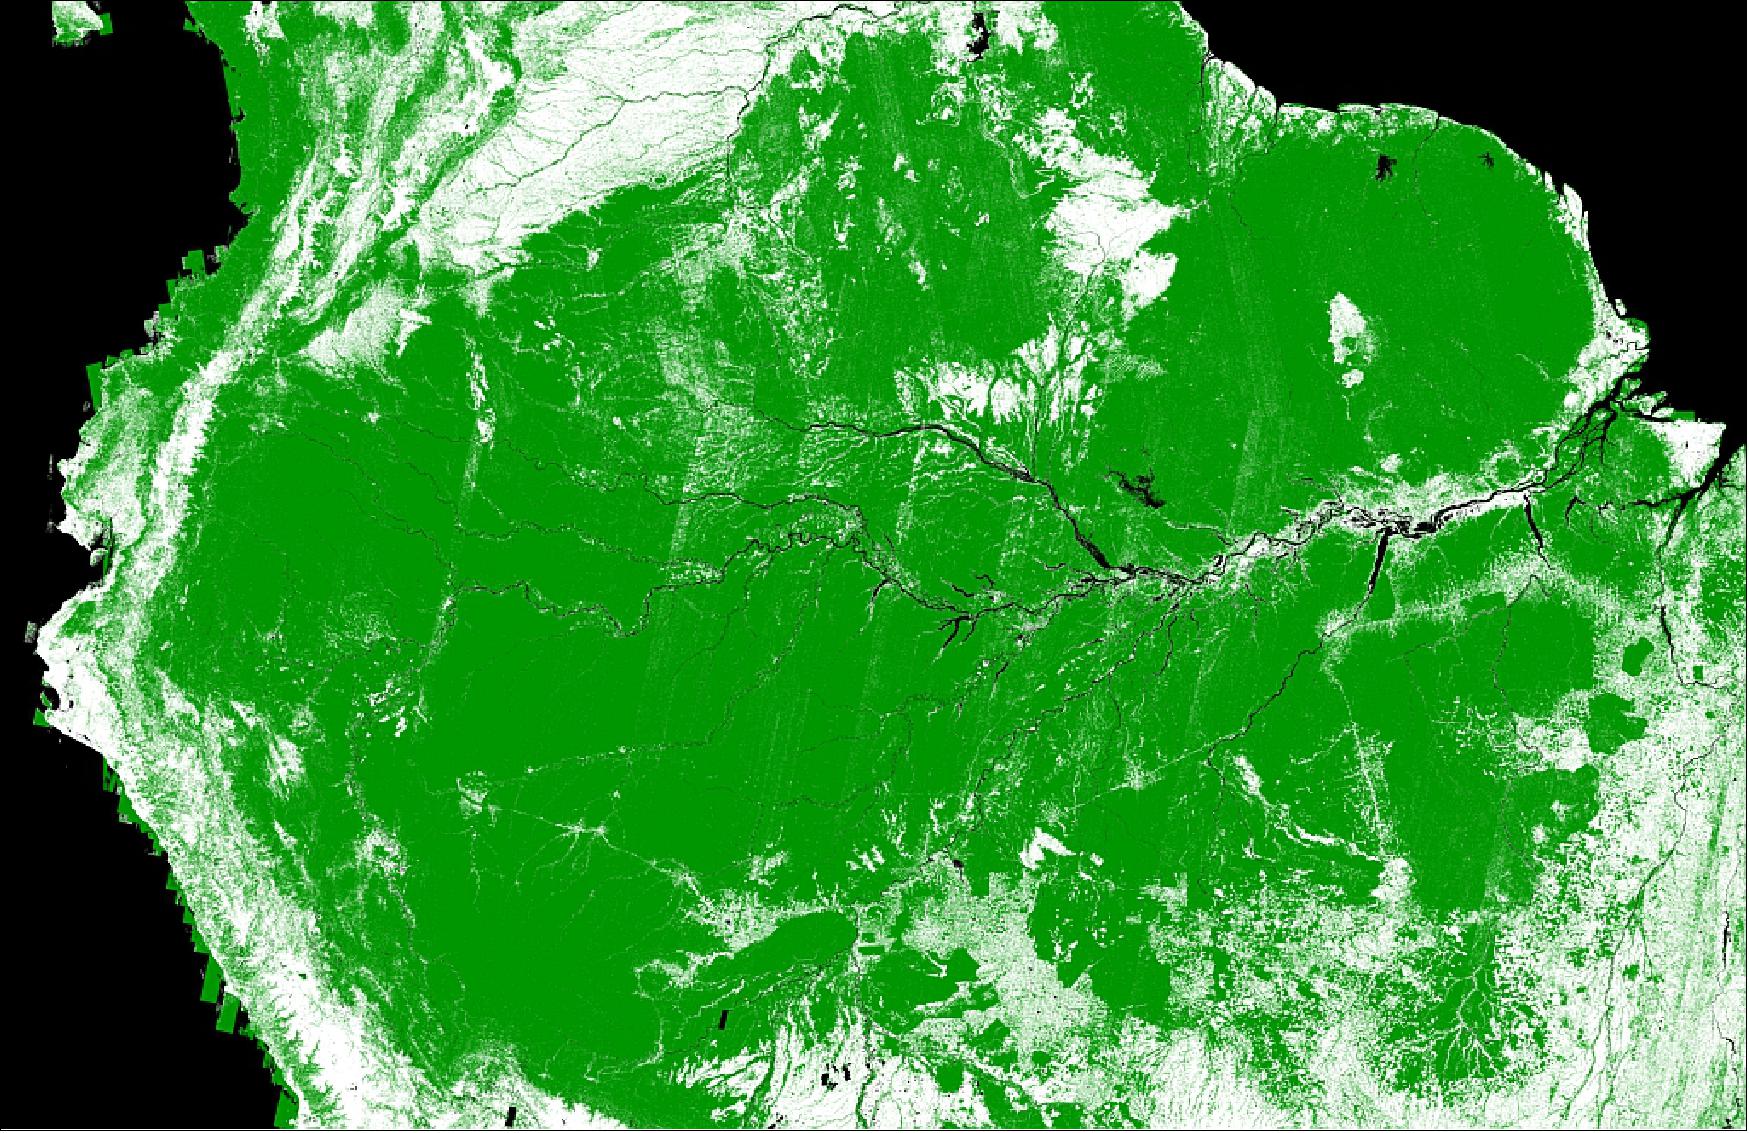 Figure 37: TanDEM-X Forest/Non-Forest Map example over the Amazon Rainforest (image credit: DLR)